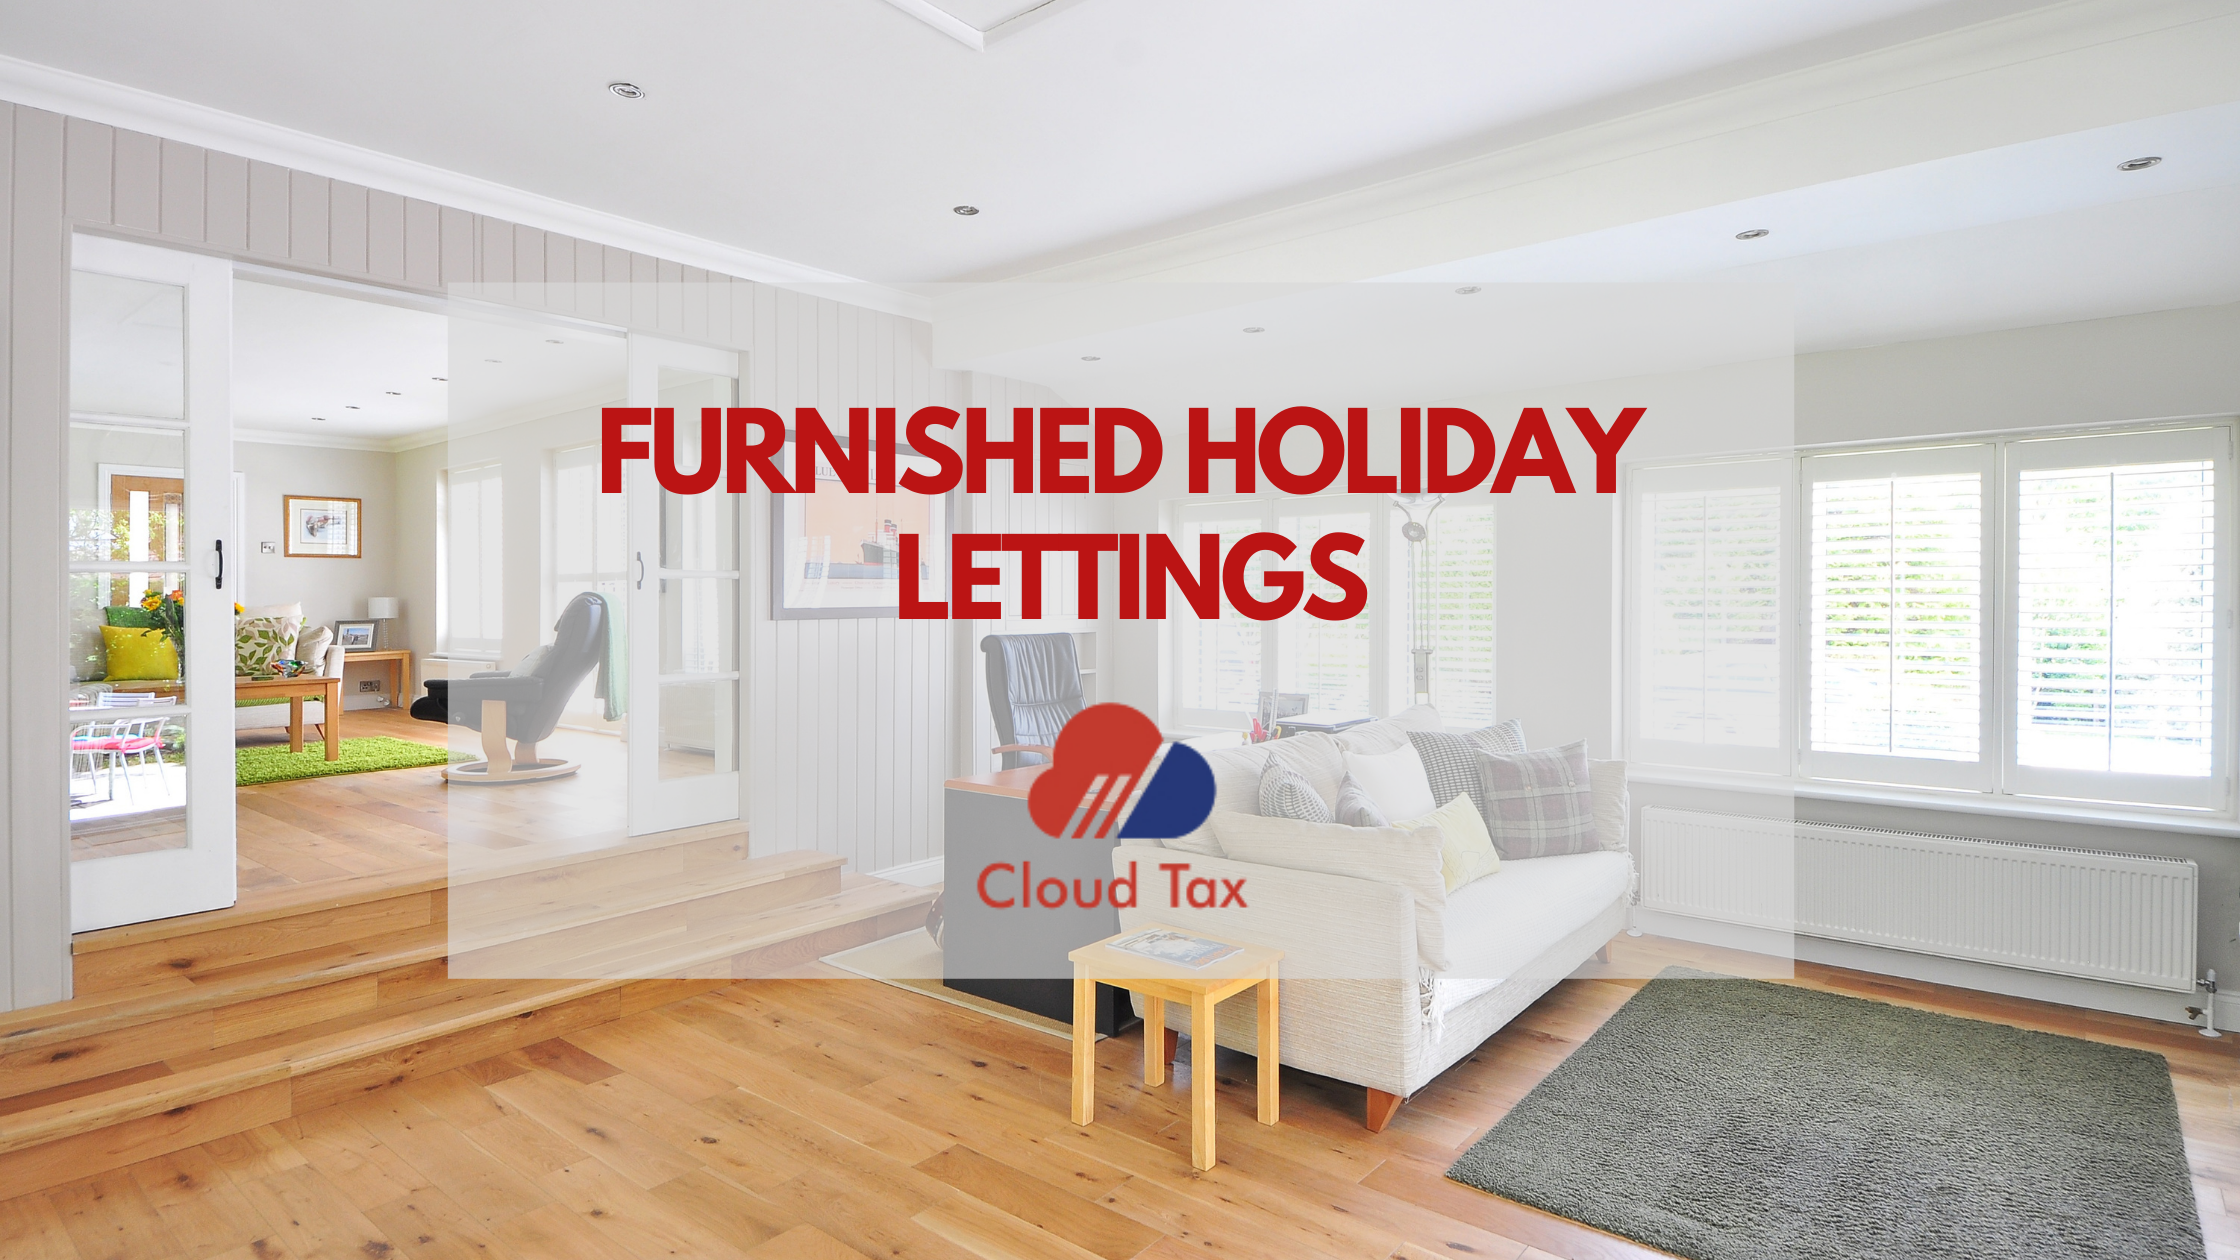 Furnished holiday lettings